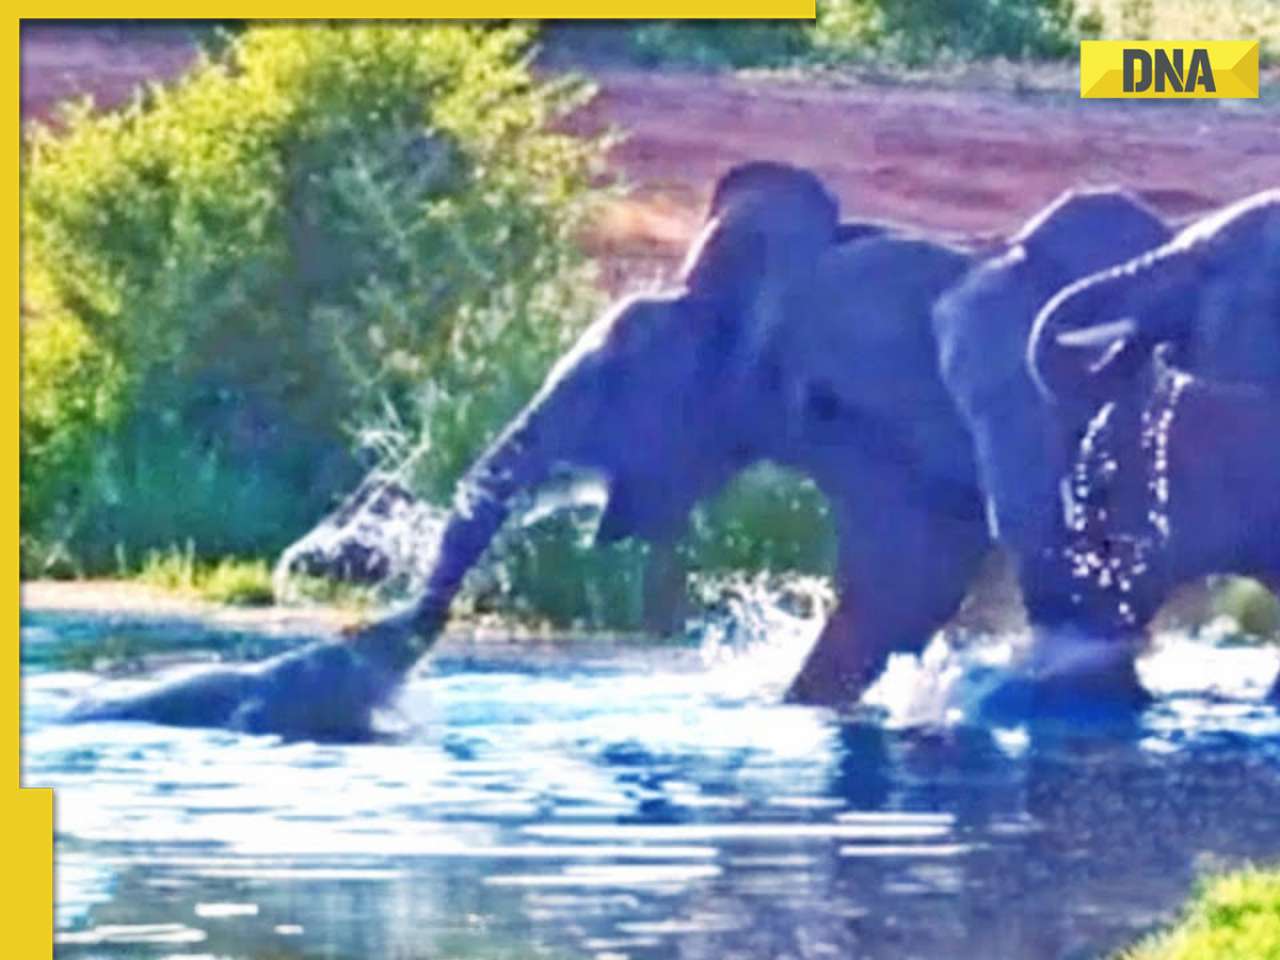 Viral video: Elephant fights for life as crocodile bites its trunk in deadly attack, watch